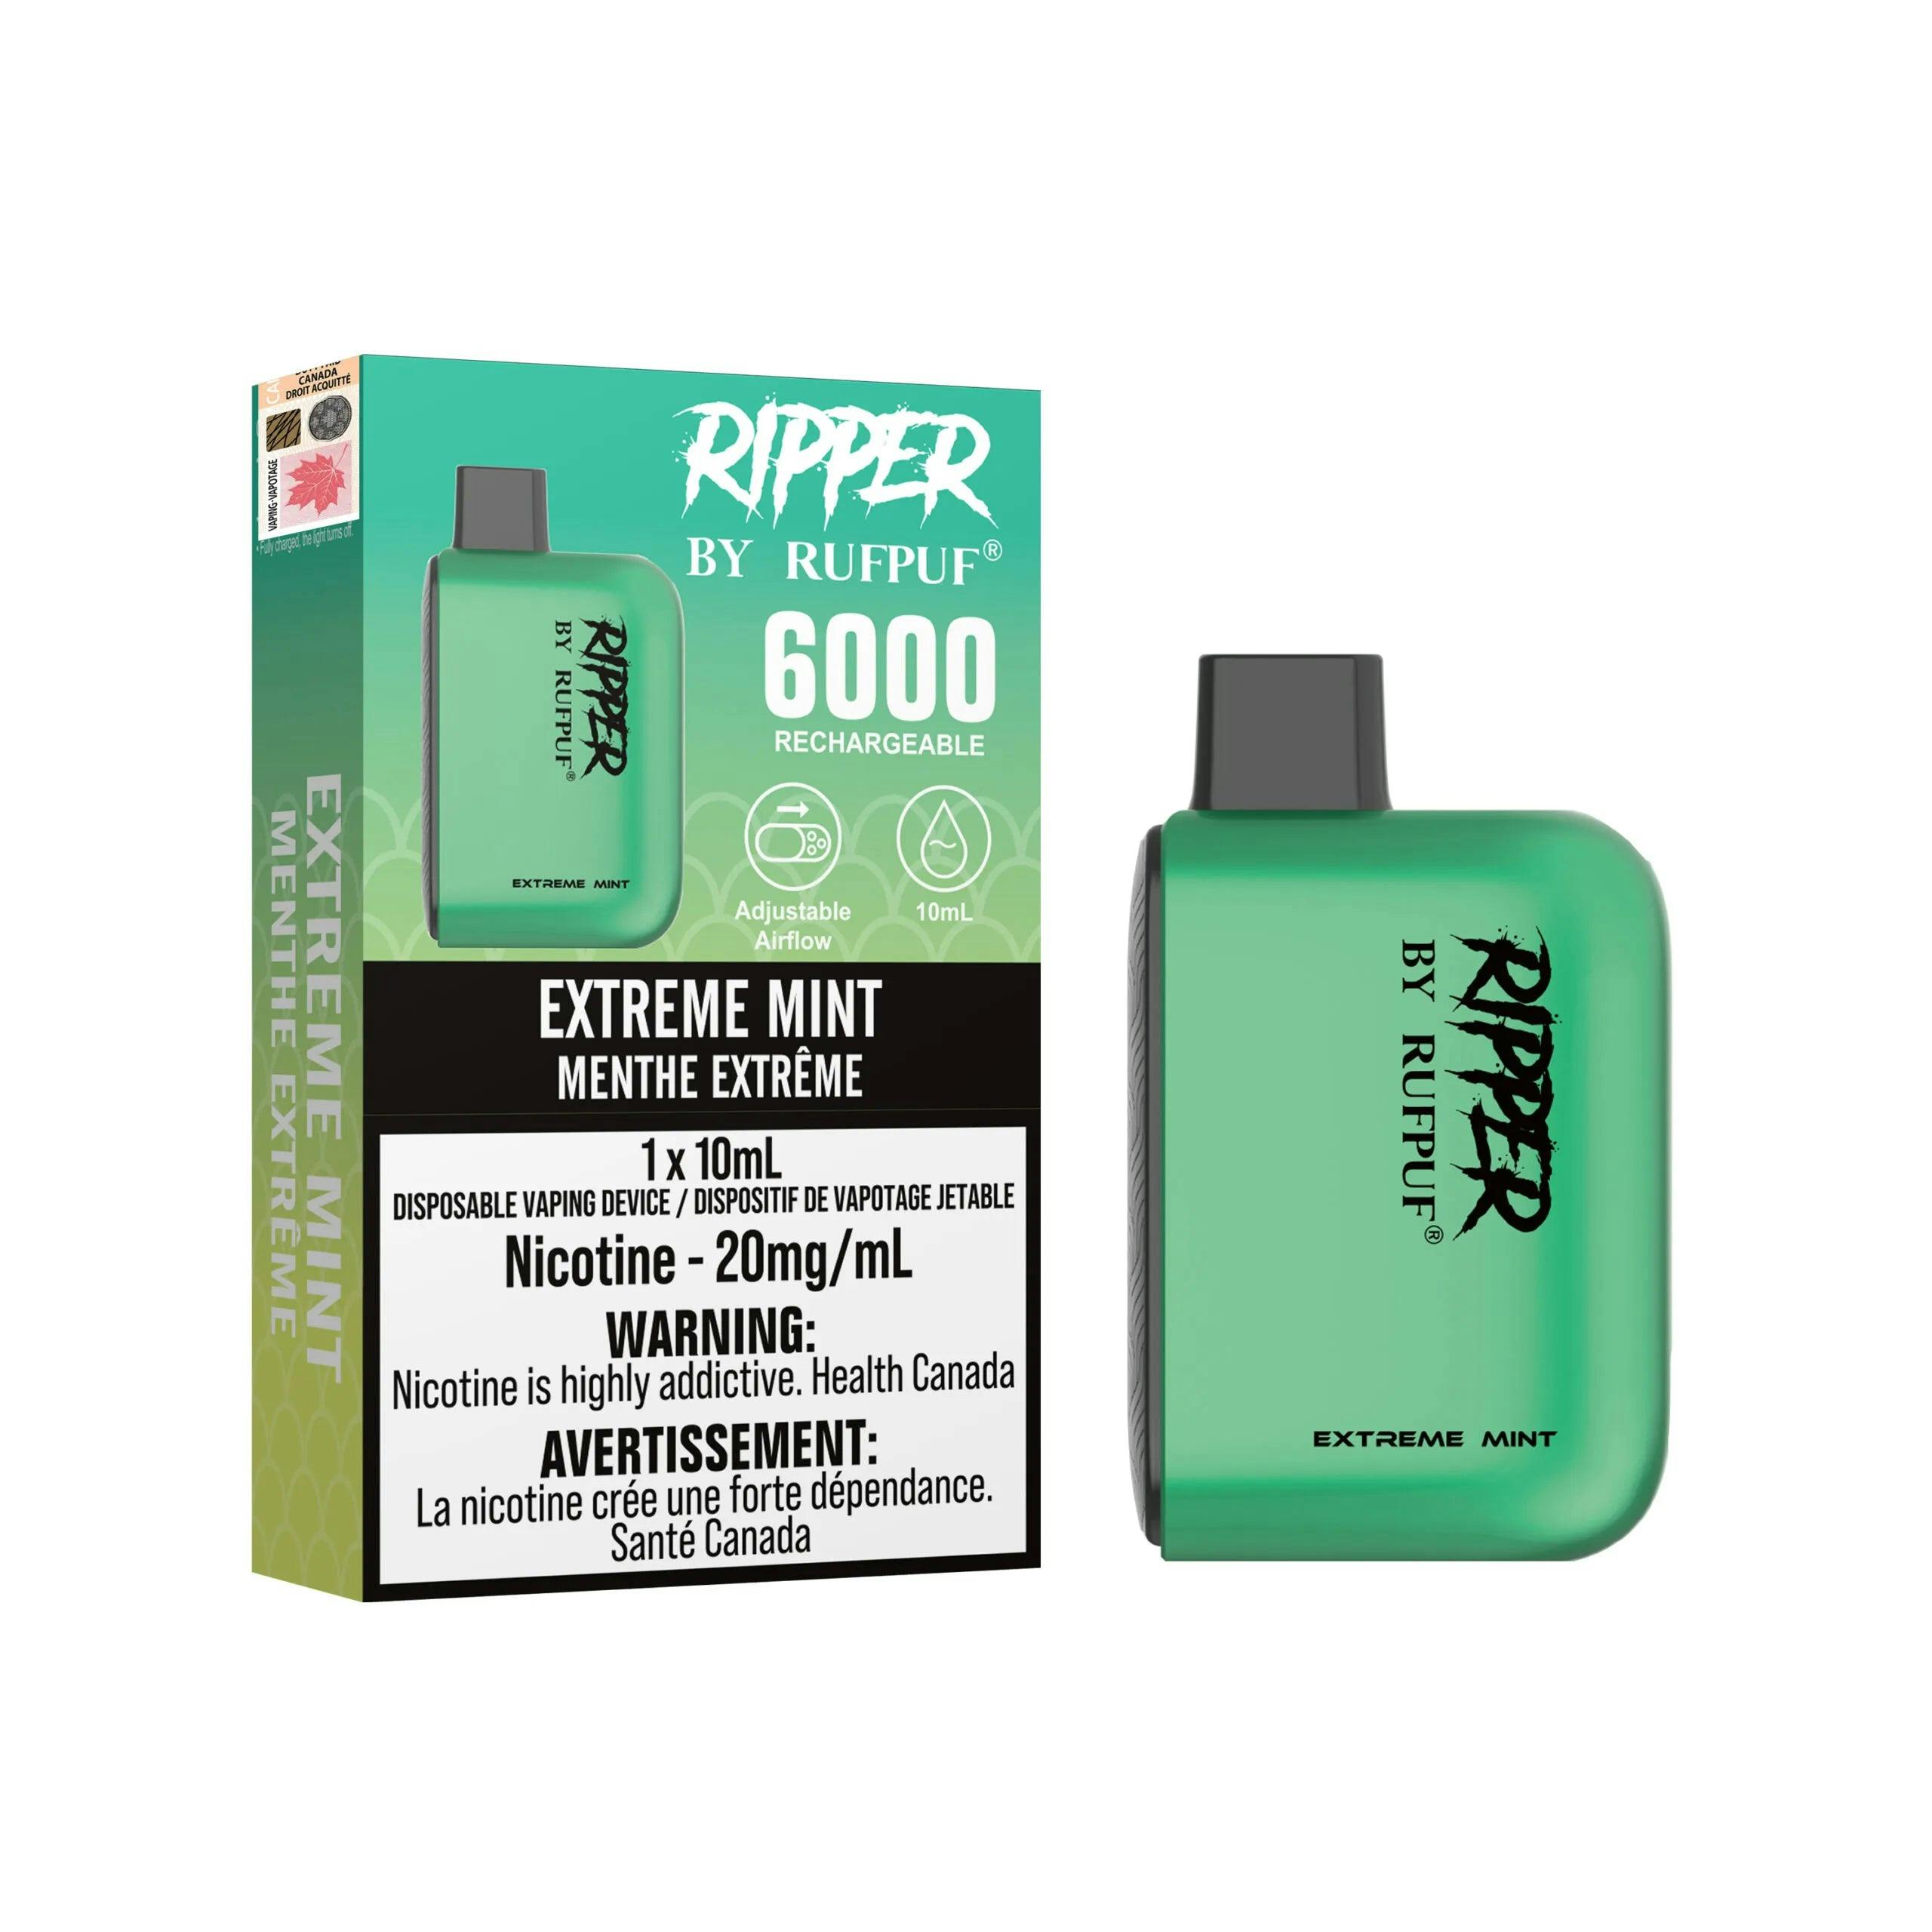 Rufpuf Ripper 20mg 6000 Puffs 10CT- Excise Version-undefined | For sale Jubilee Distributors